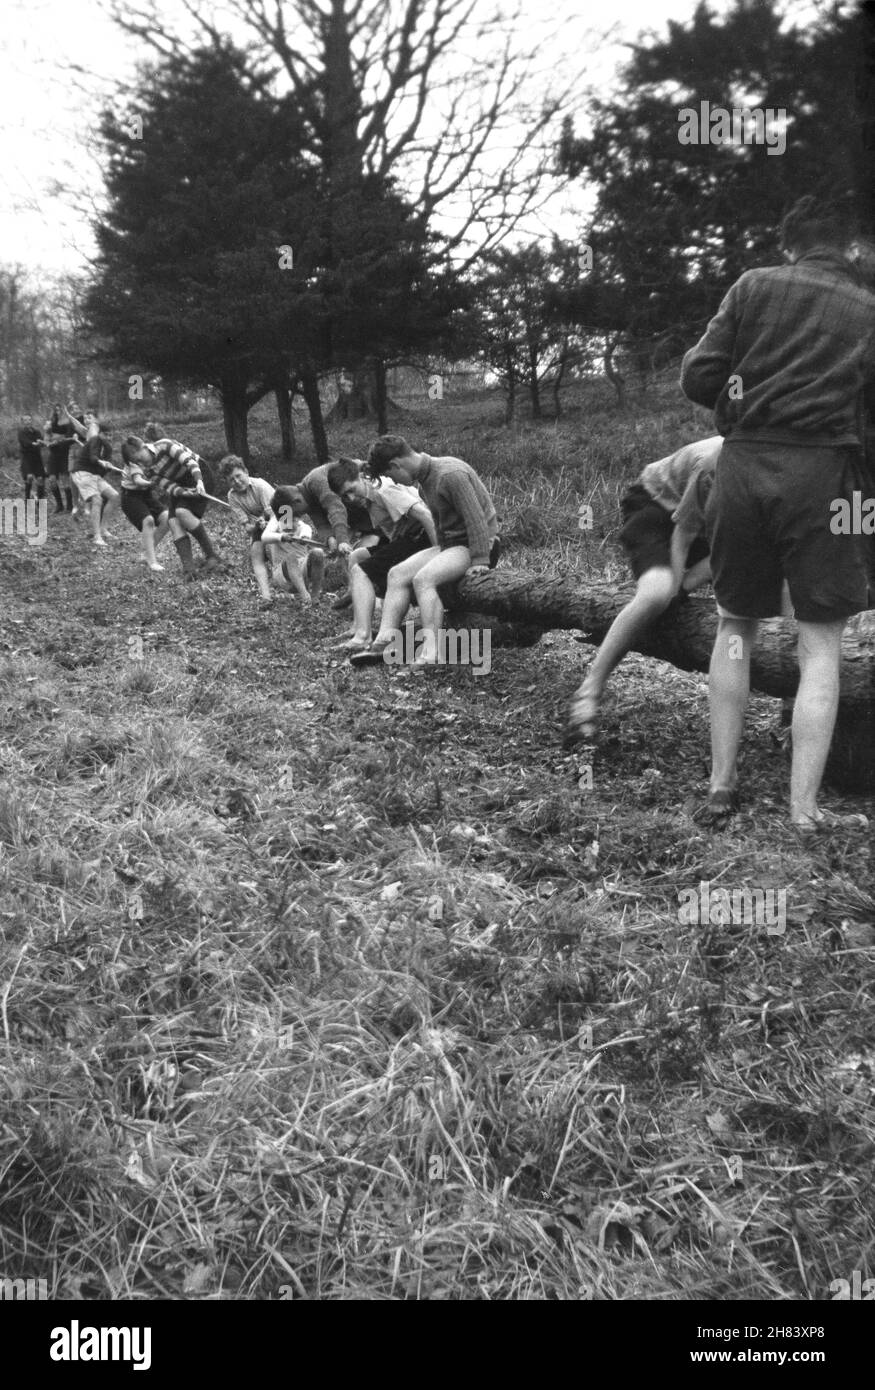 1941, historical, scout camp, log hauling, boys hauling or pulling a log up a field, one of the many activities that take place at camp, which shows the scouts skills at applying rope using a rope tackle, England, UK. Stock Photo